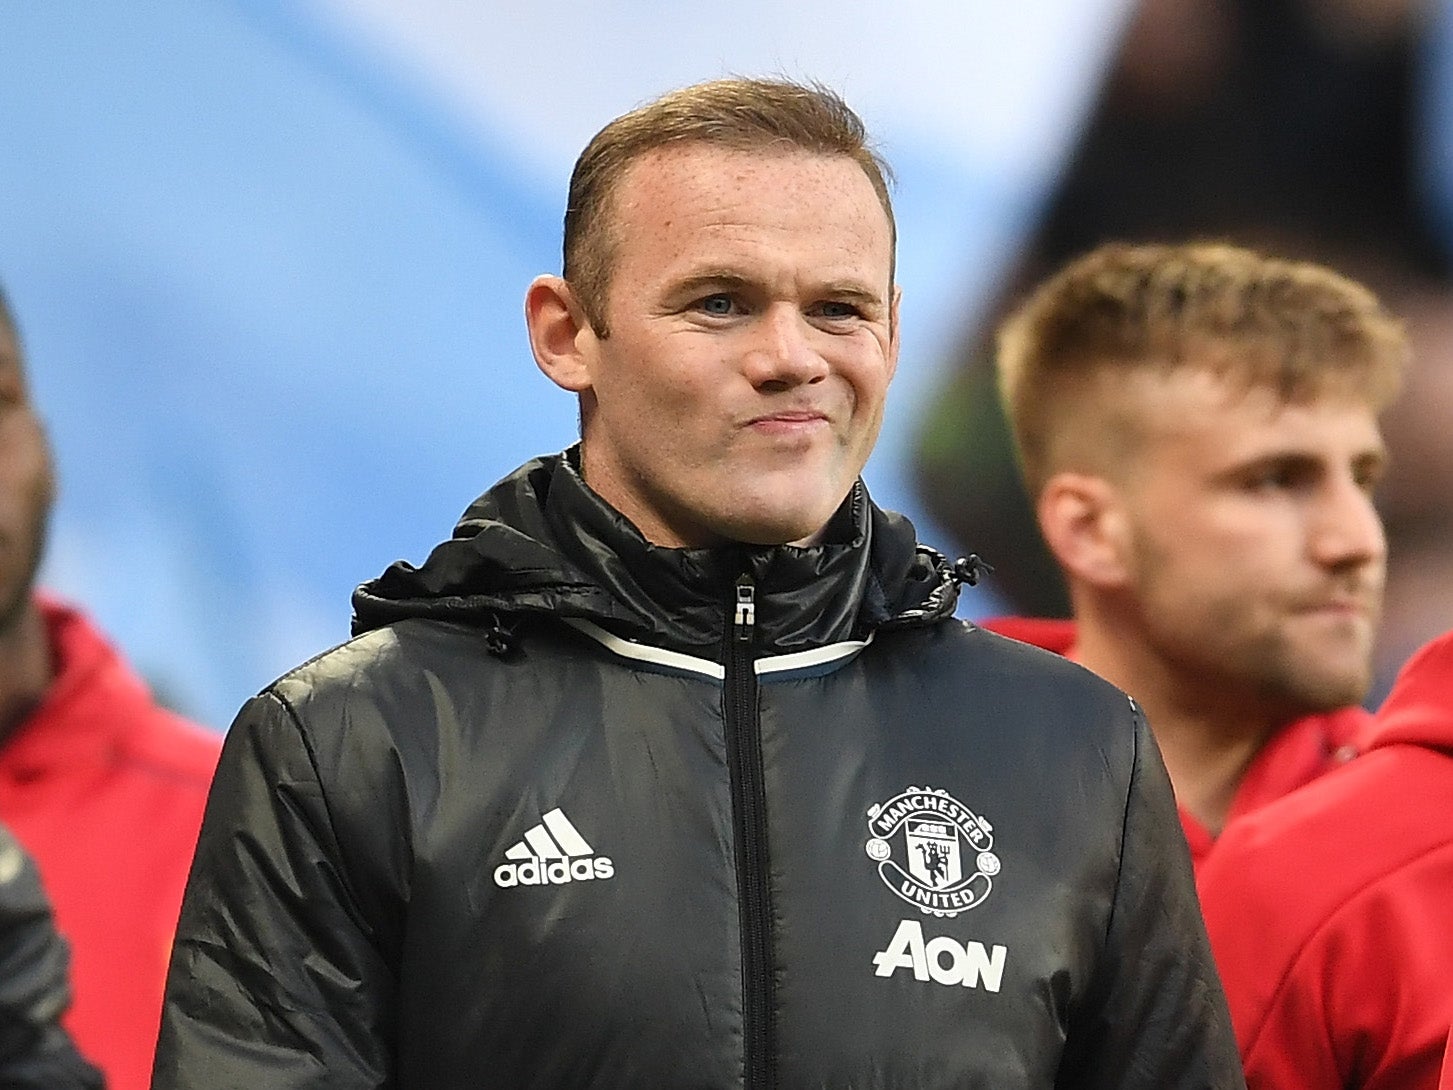 Wayne Rooney looks like he has played his last Manchester derby